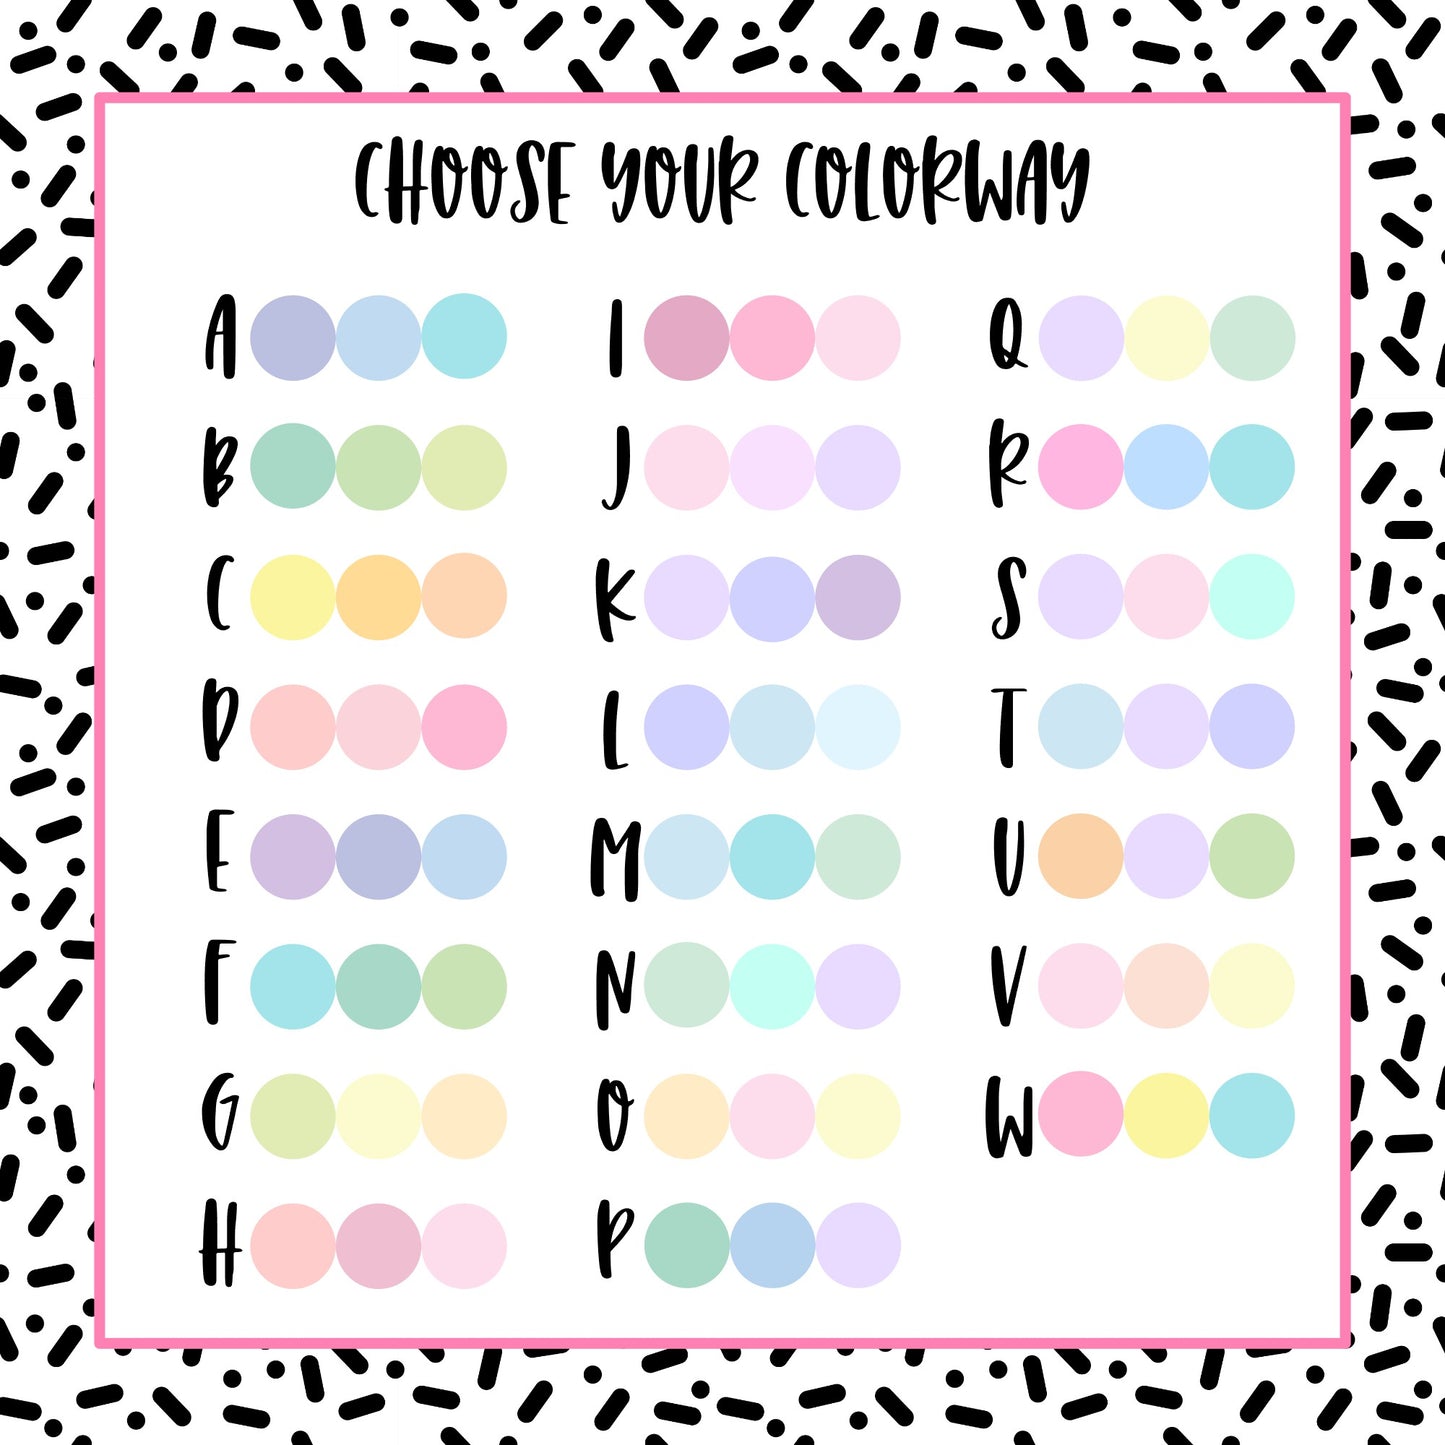 Pastel Swatches - 23 color options